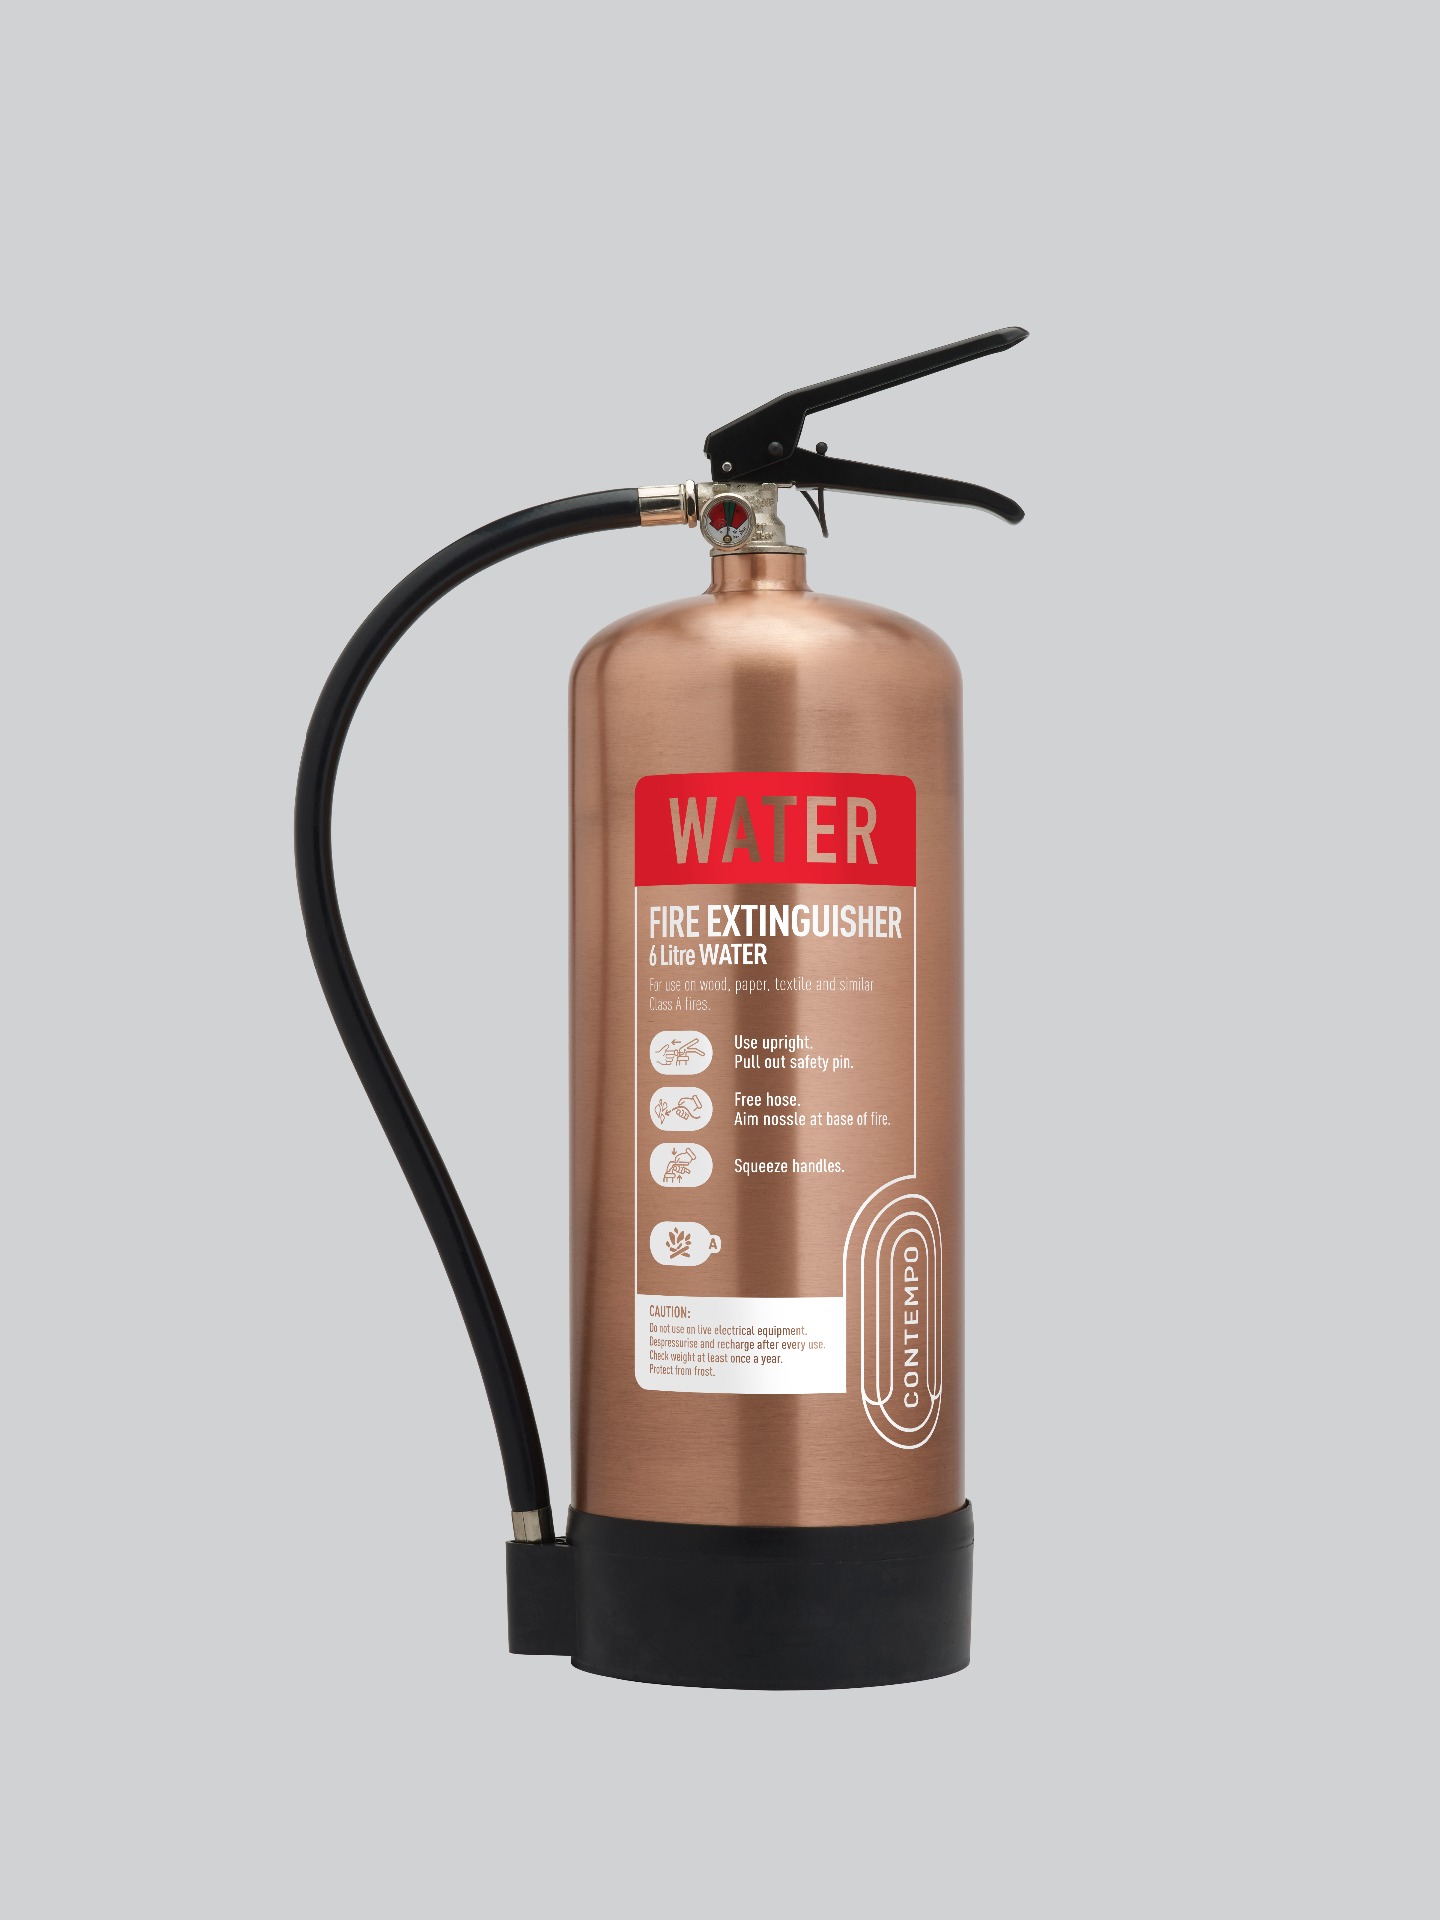 Midland Fire - First Class Range - 6 Litre Afff (Foam Spray) with a golden shine finish